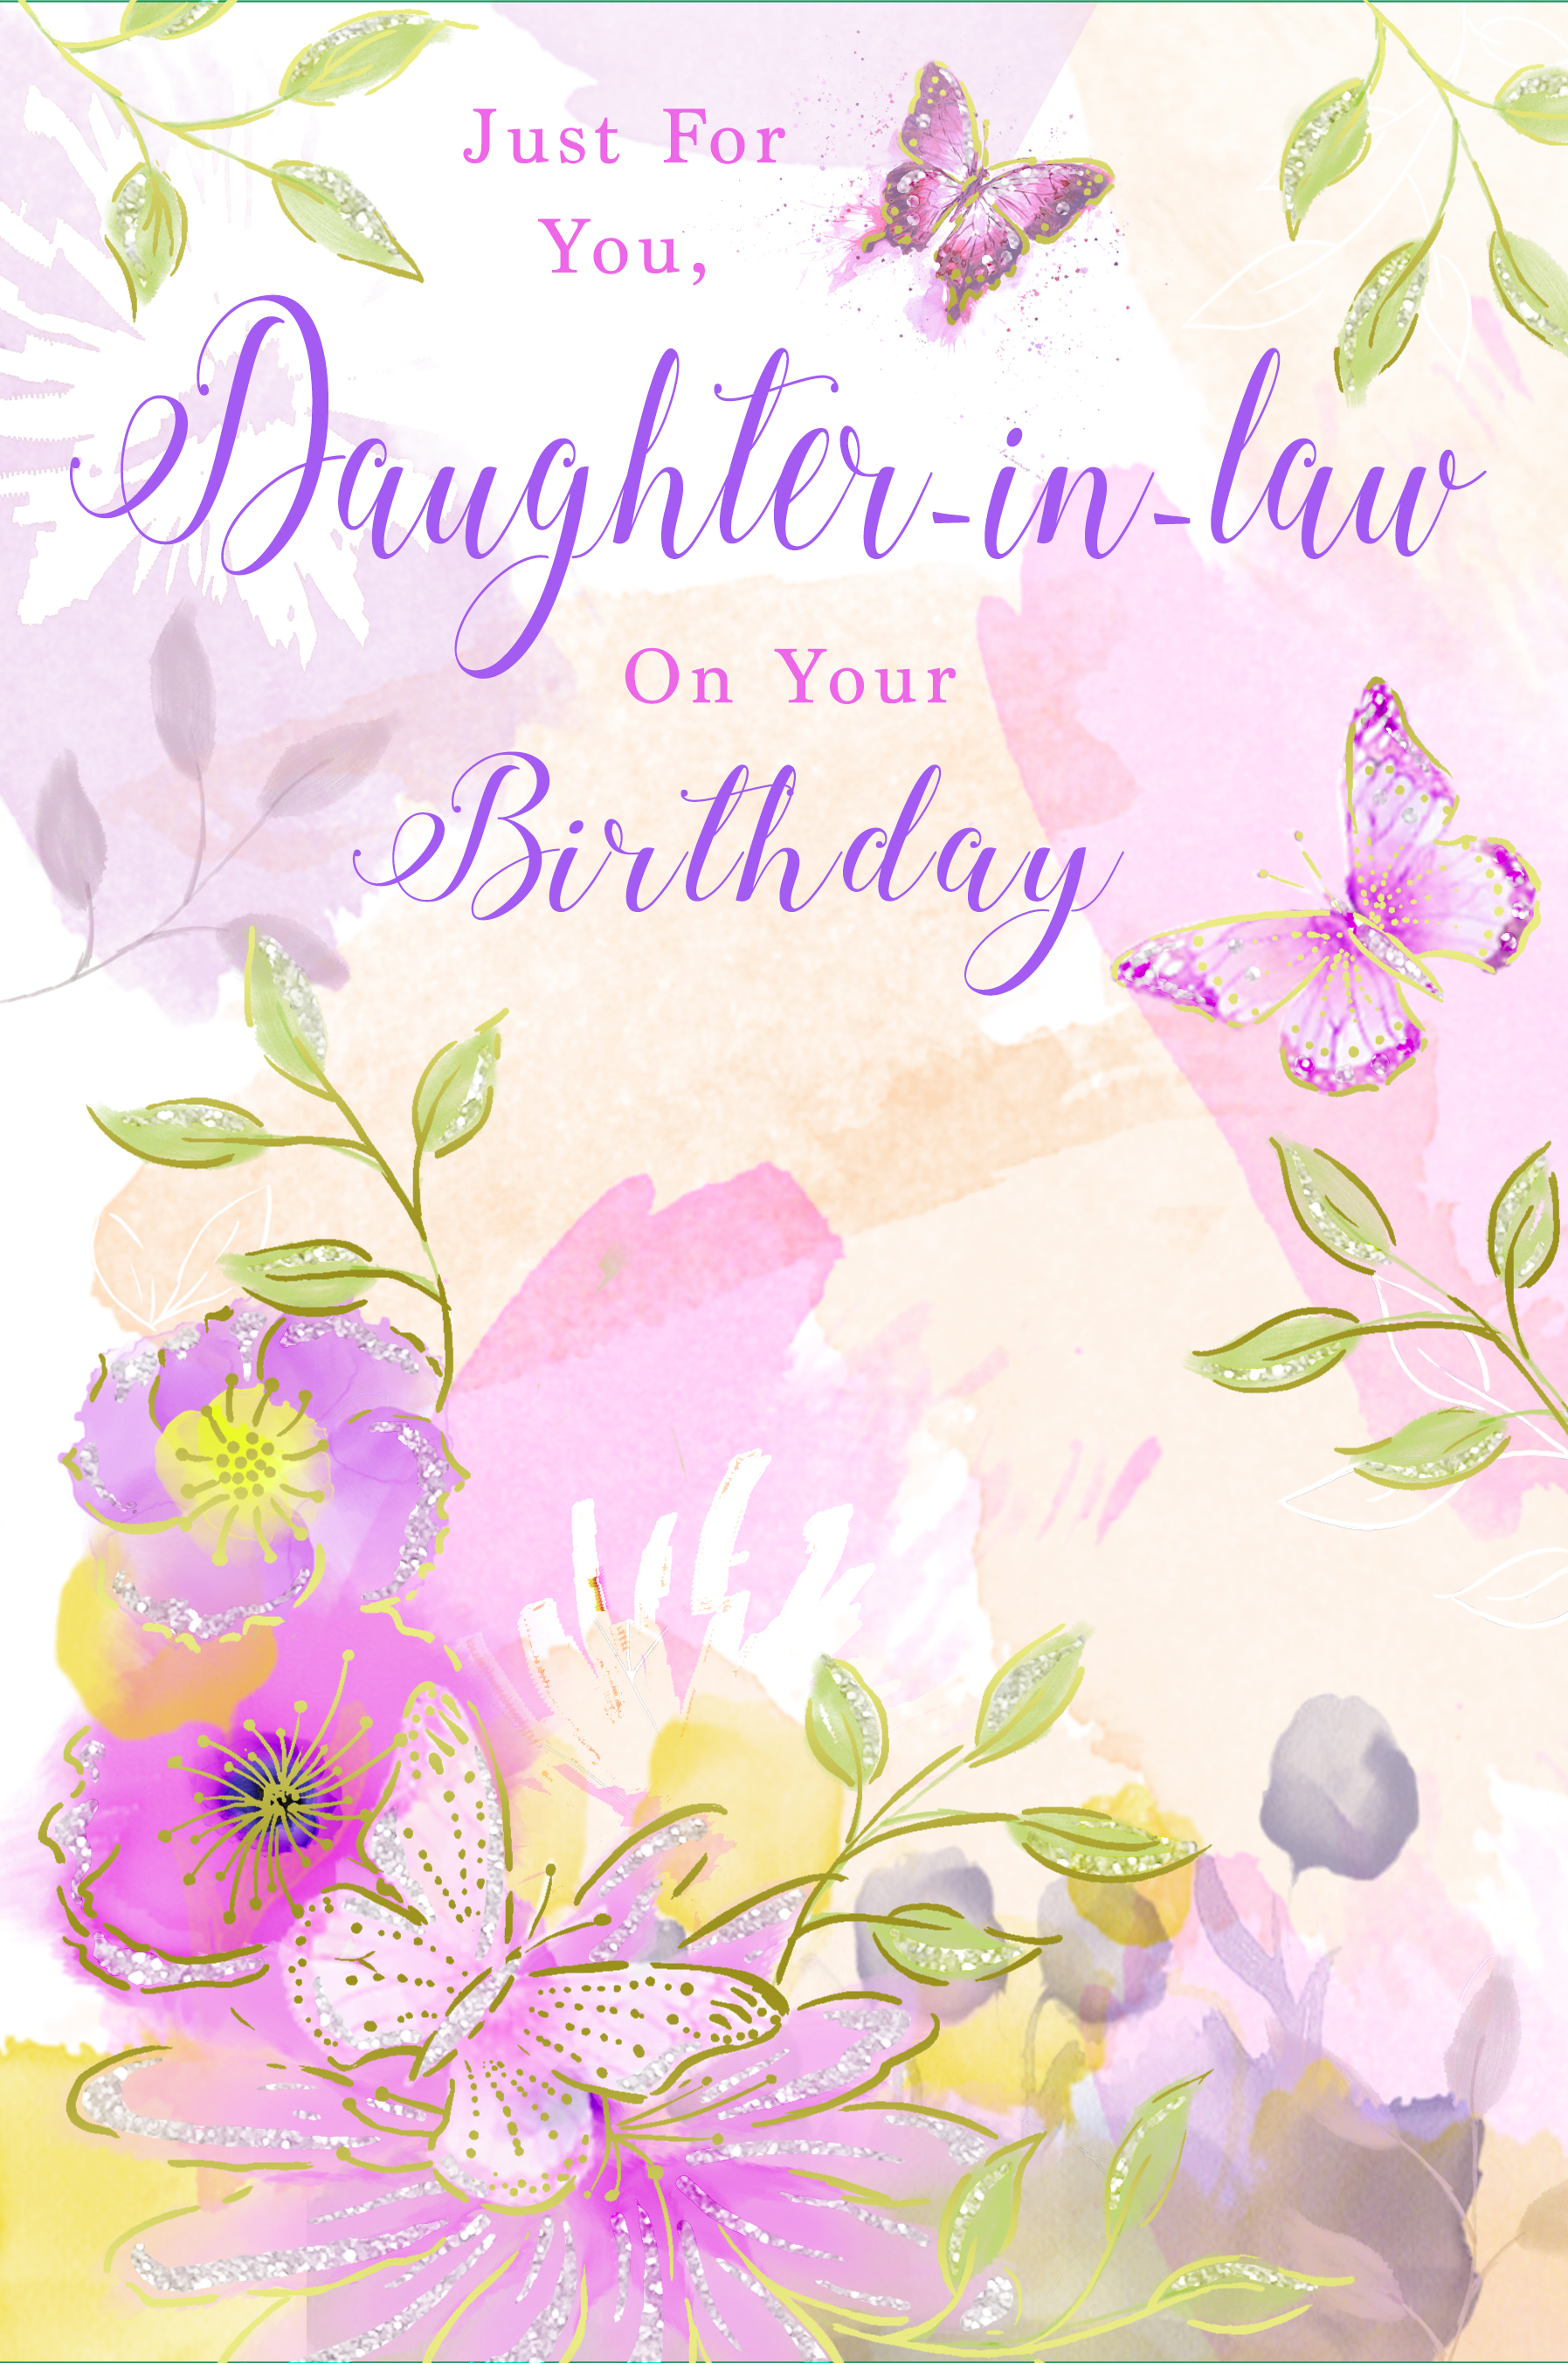 Daughter-in-law Cards (Sold in 6s)